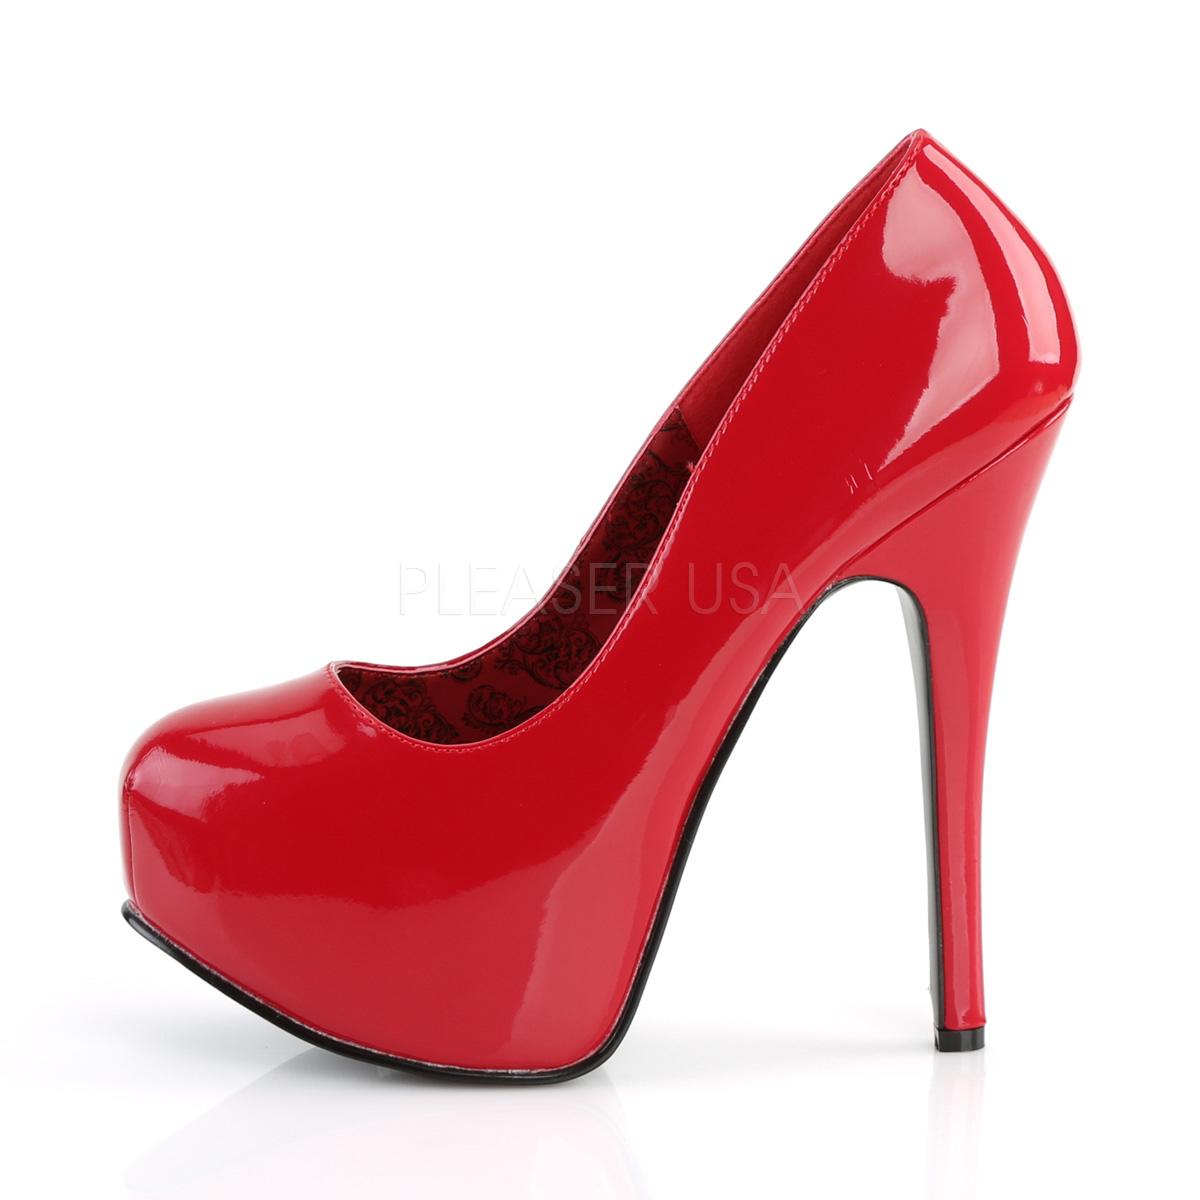 Red Patent Court Shoe